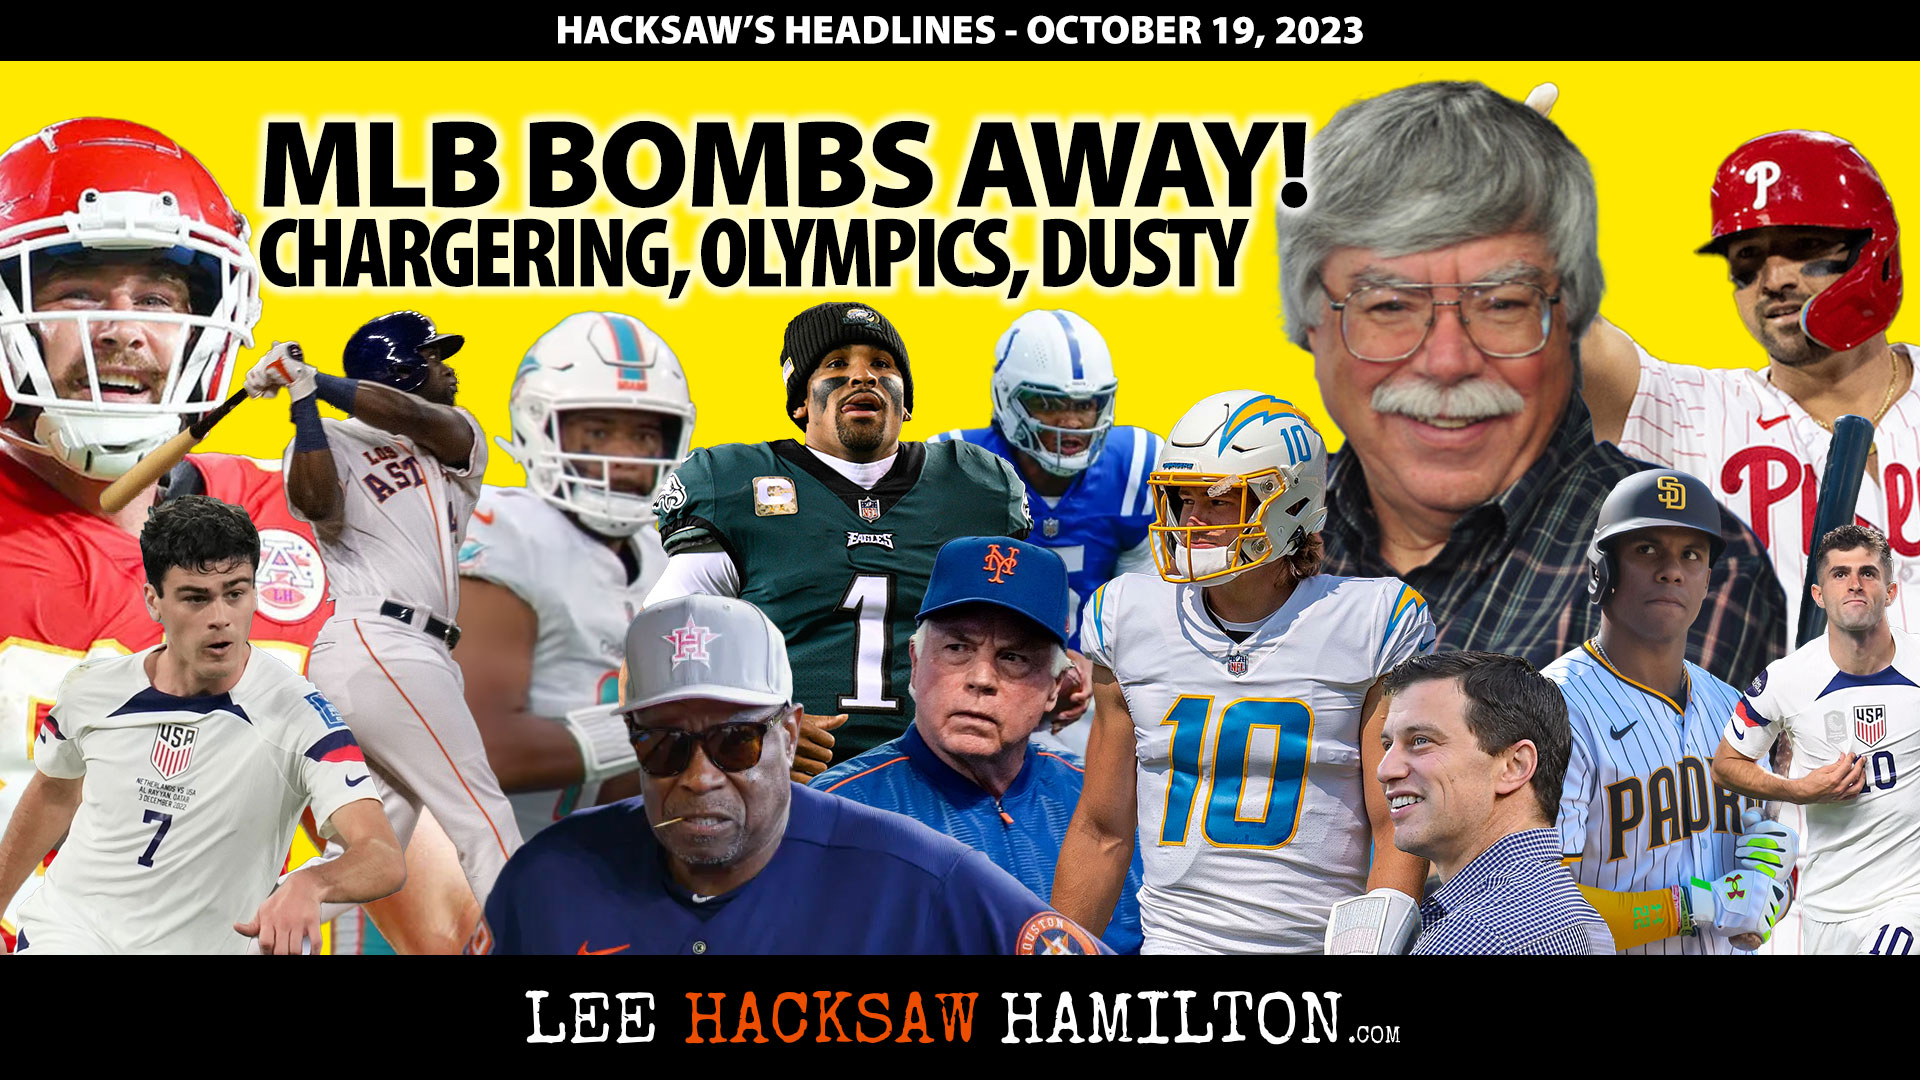 Lee Hacksaw Hamilton discusses MLB Playoffs, Dusty, Buck, Padres, Dodgers, Chargers, Cowboys, NFL, Team USA, Olympics, FIFA